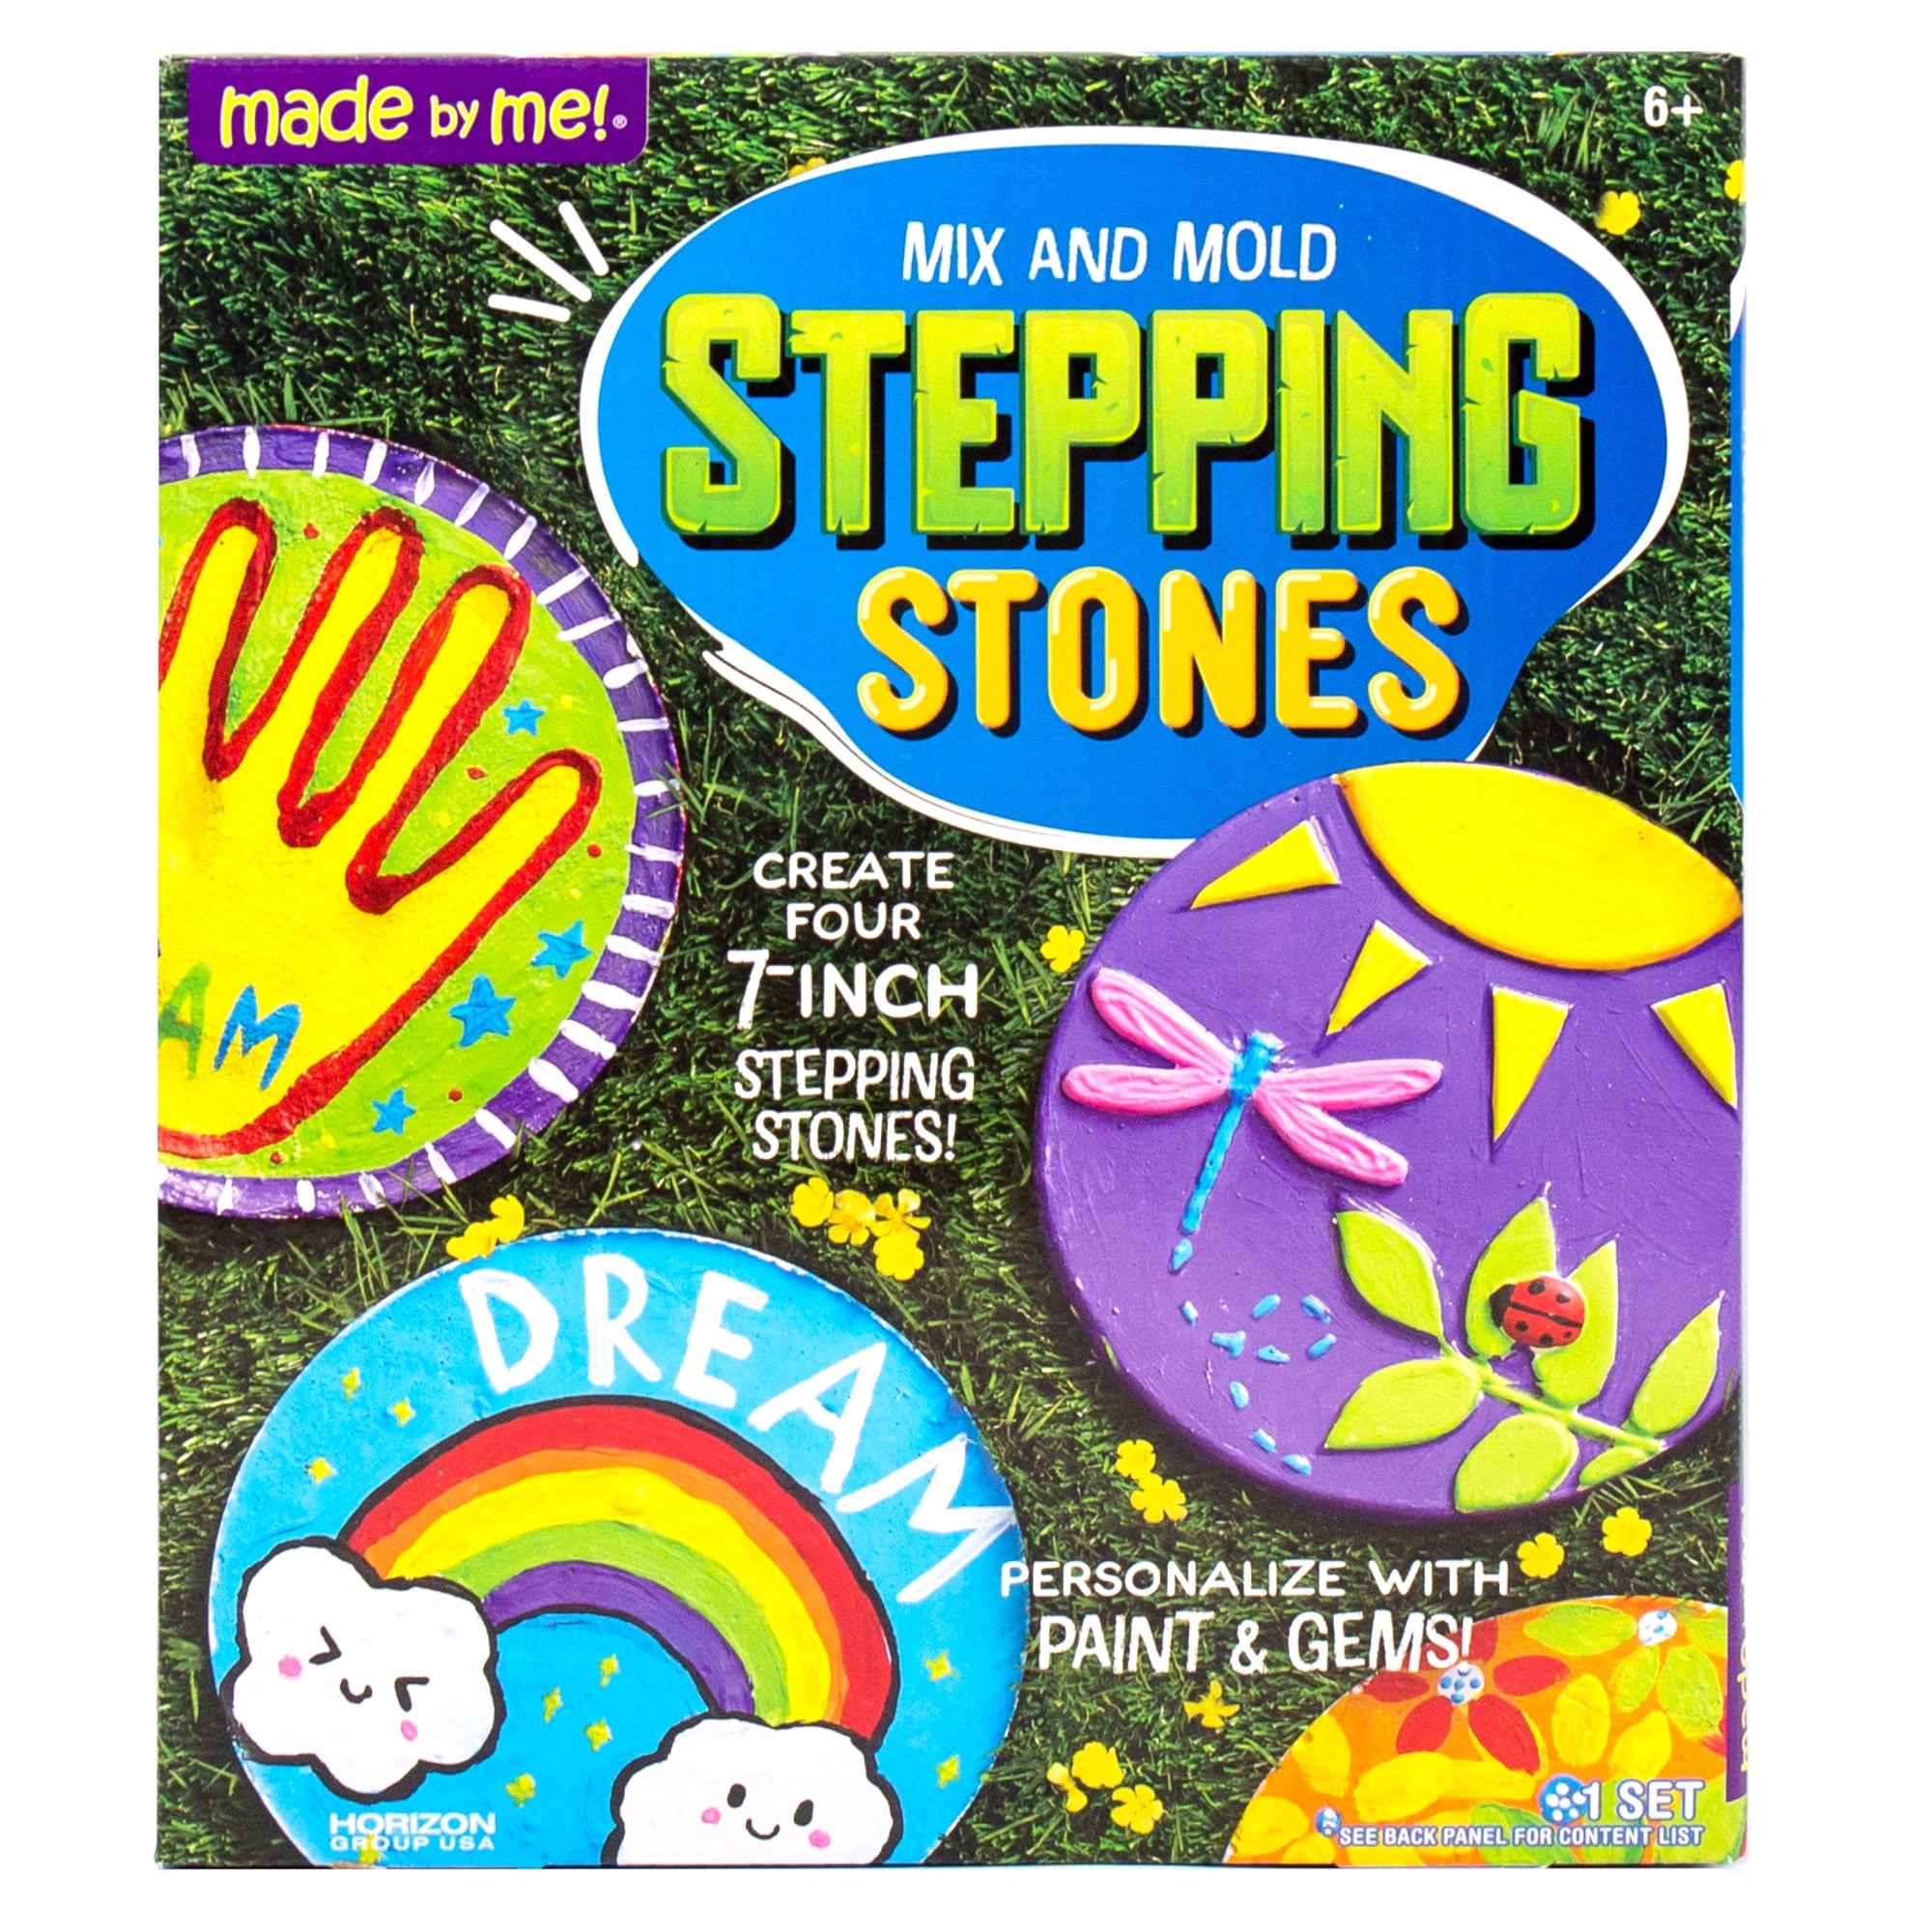 Made By Me Mix and Mold Stepping Stones Kit, 1 ct - Kroger